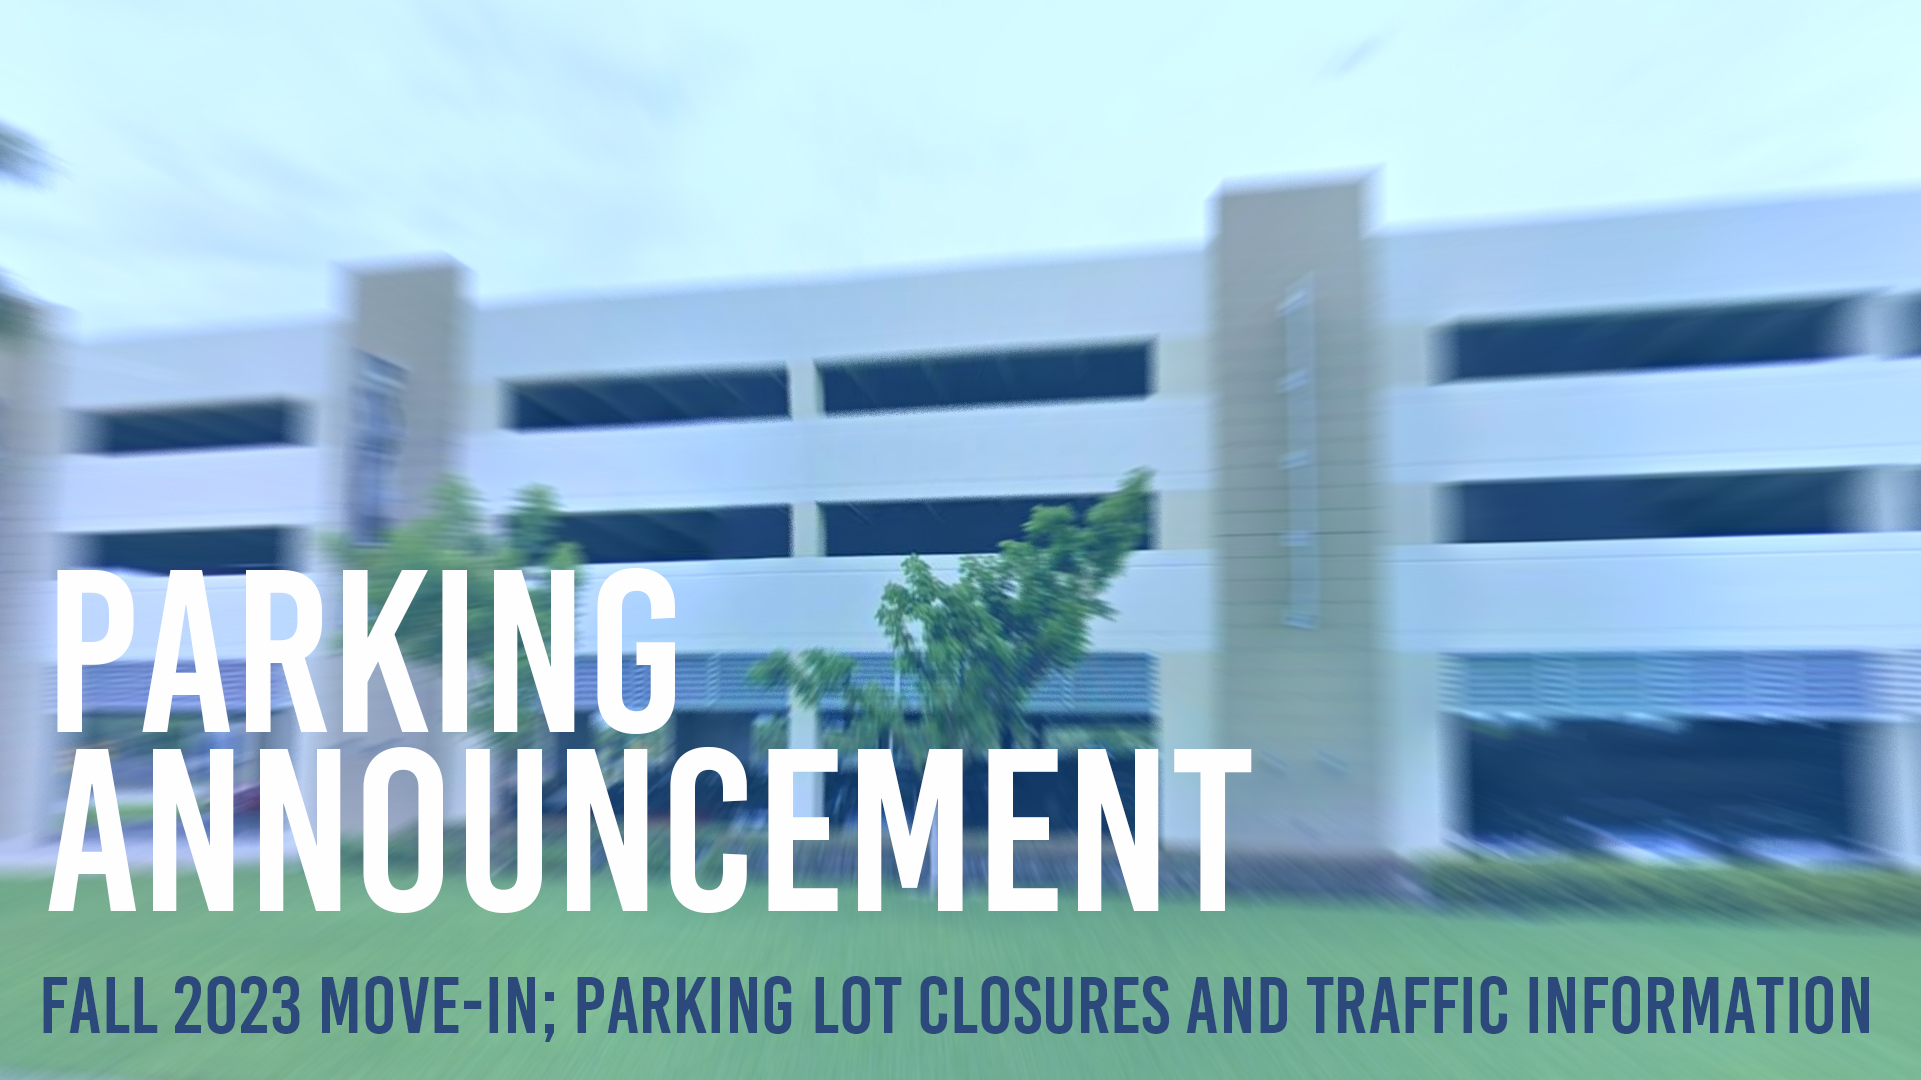 Fall 2023 Move-In; Parking Lot Closures and Traffic Information